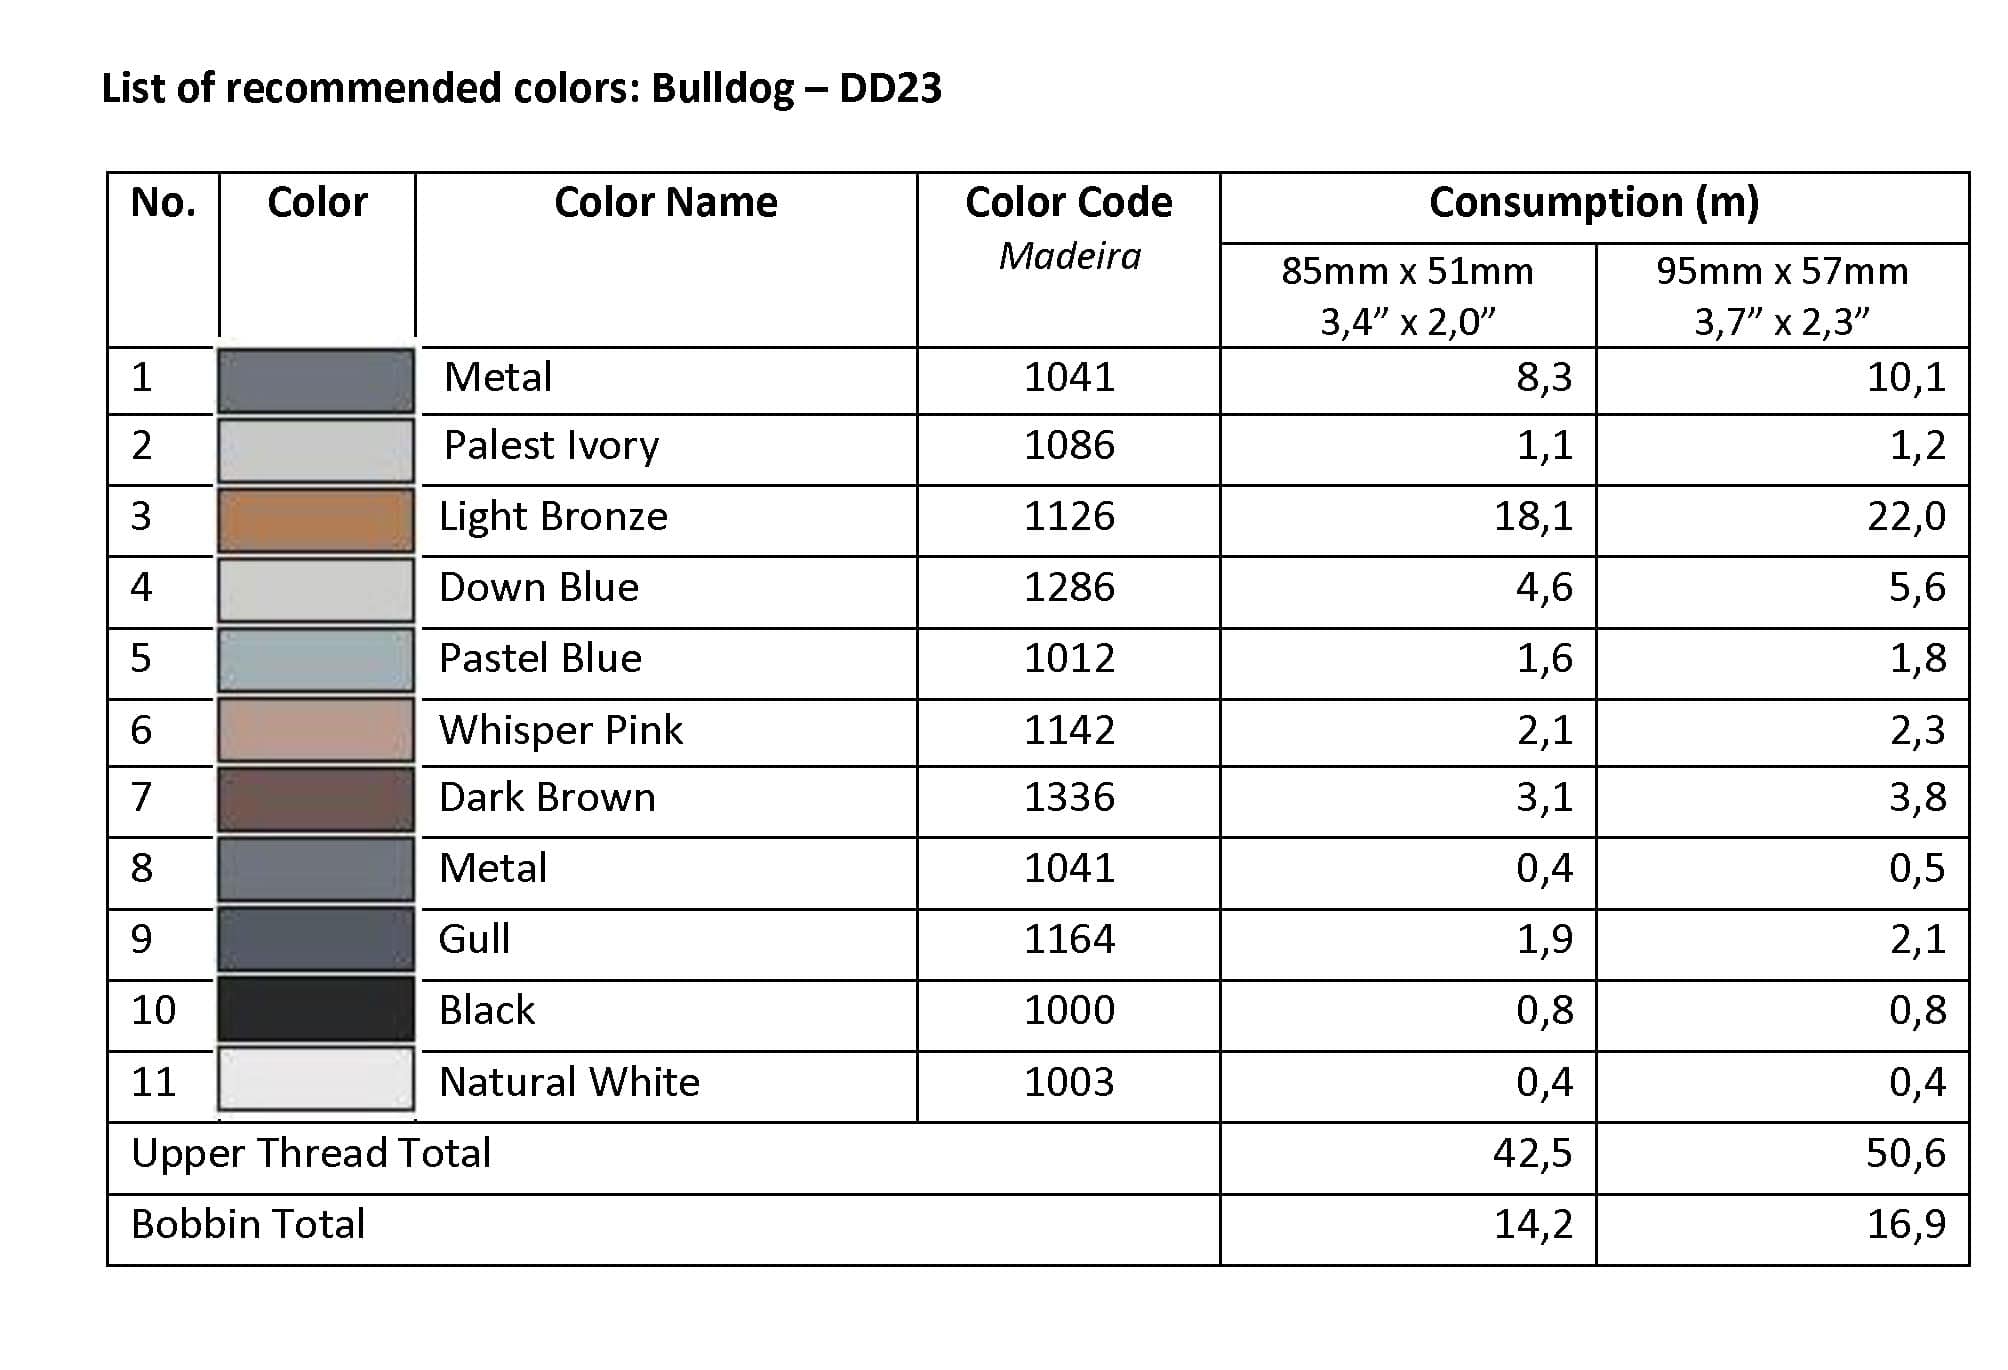 List of Recommended Colors - Bulldog DD23